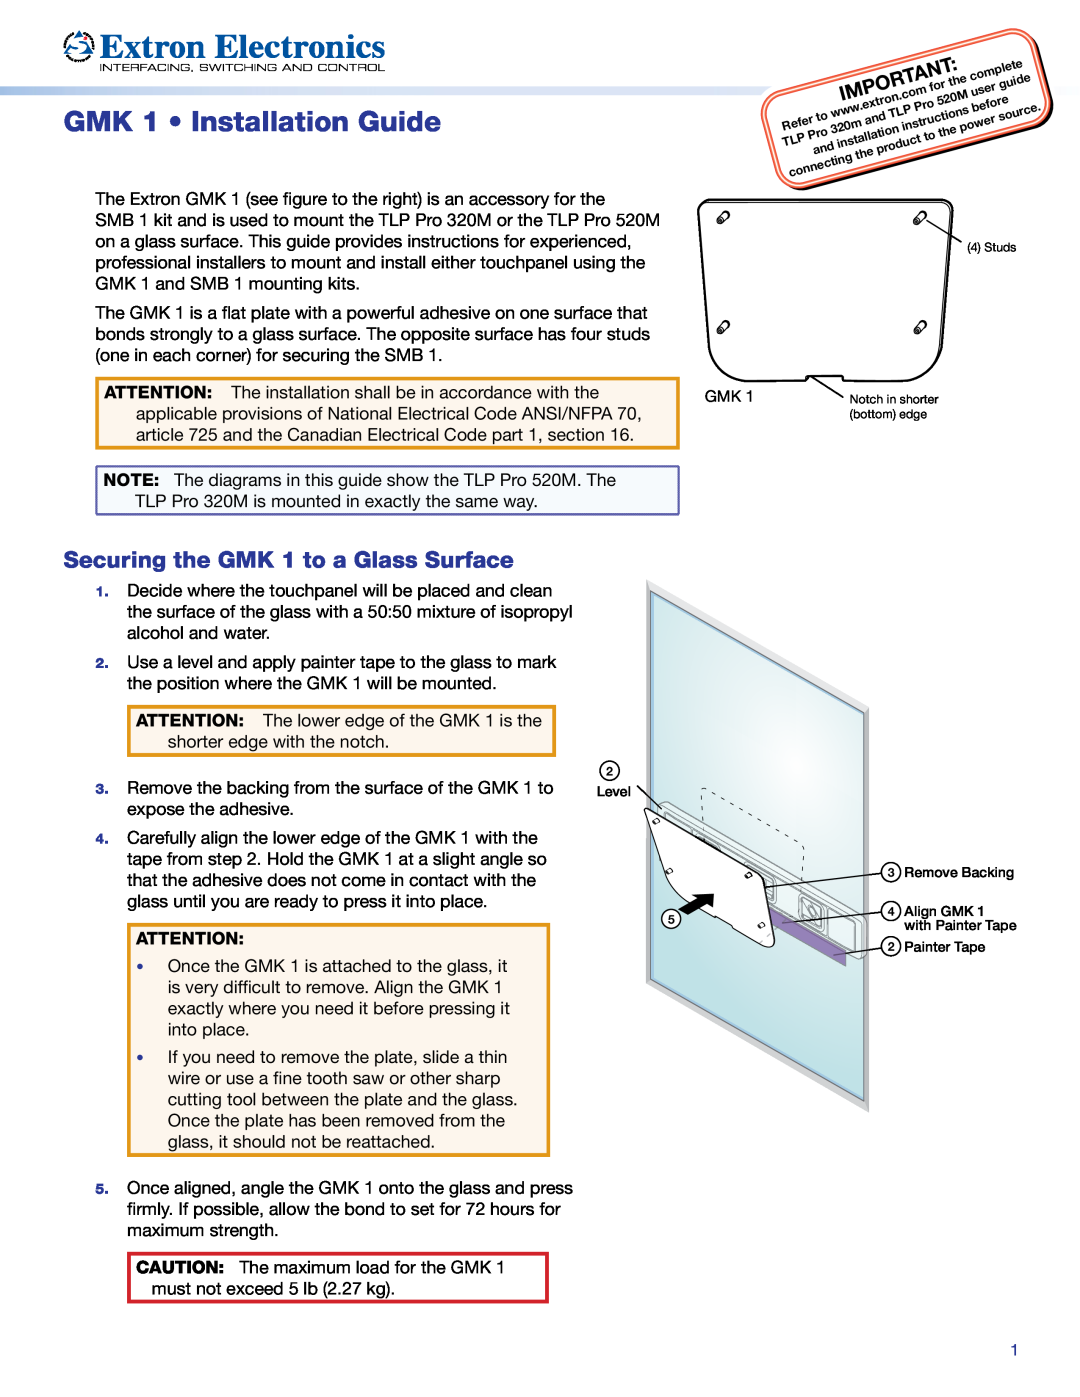 Extron electronic installation instructions GMK 1 Installation Guide, Securing the GMK 1 to a Glass Surface 